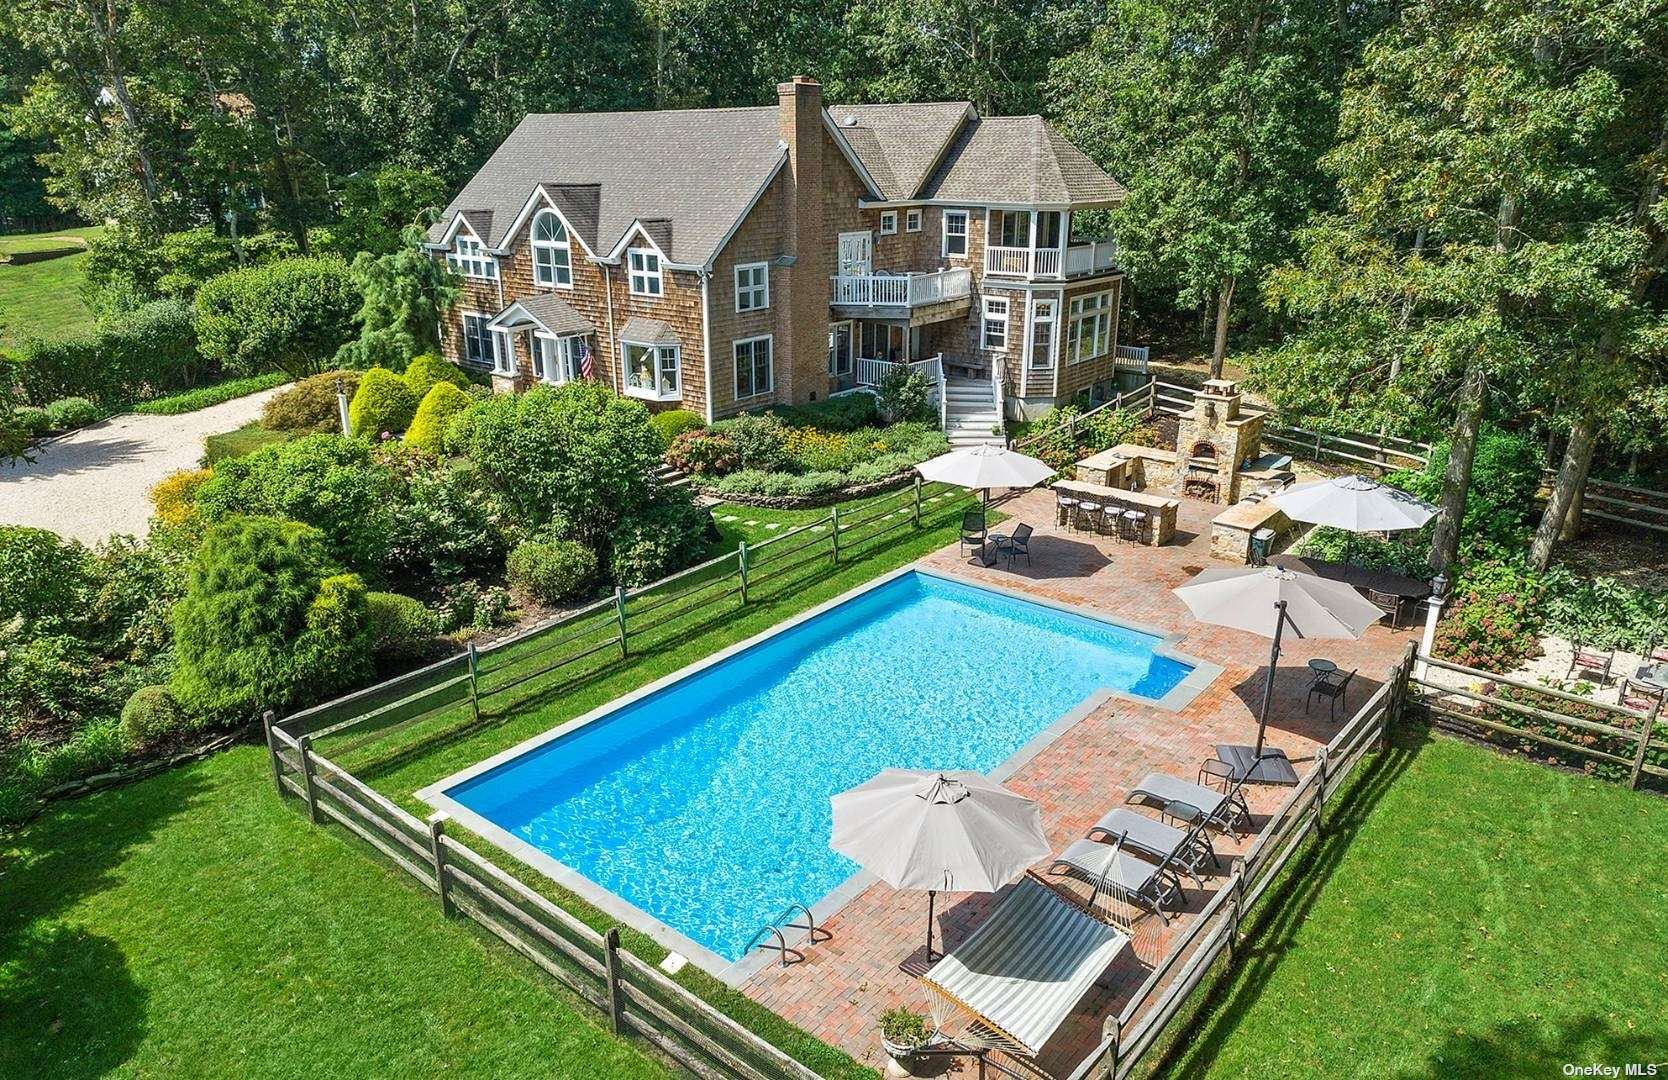 an aerial view of a house with pool